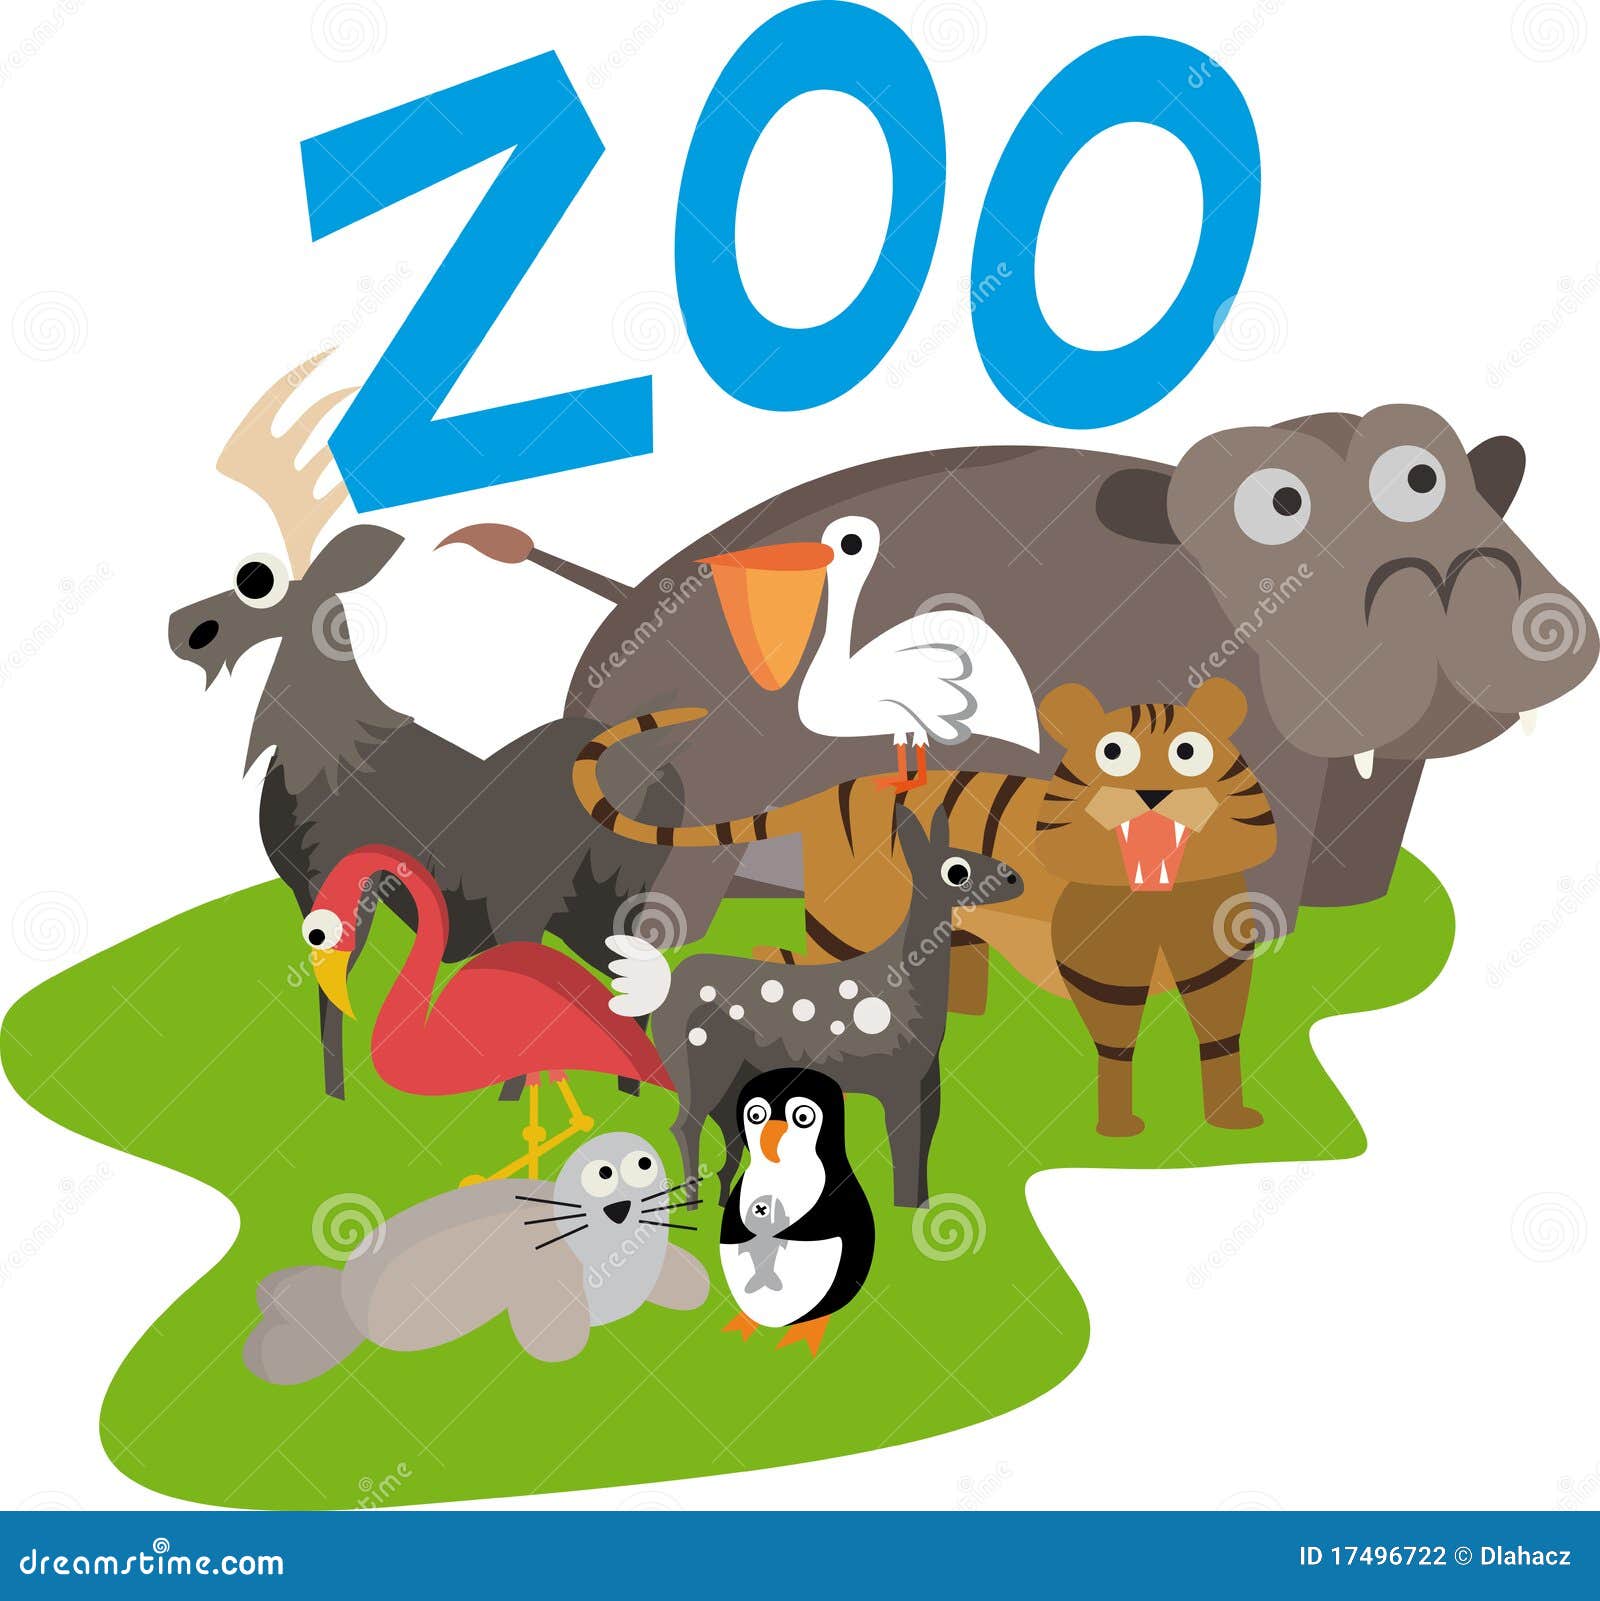 clipart zoo pictures - photo #20